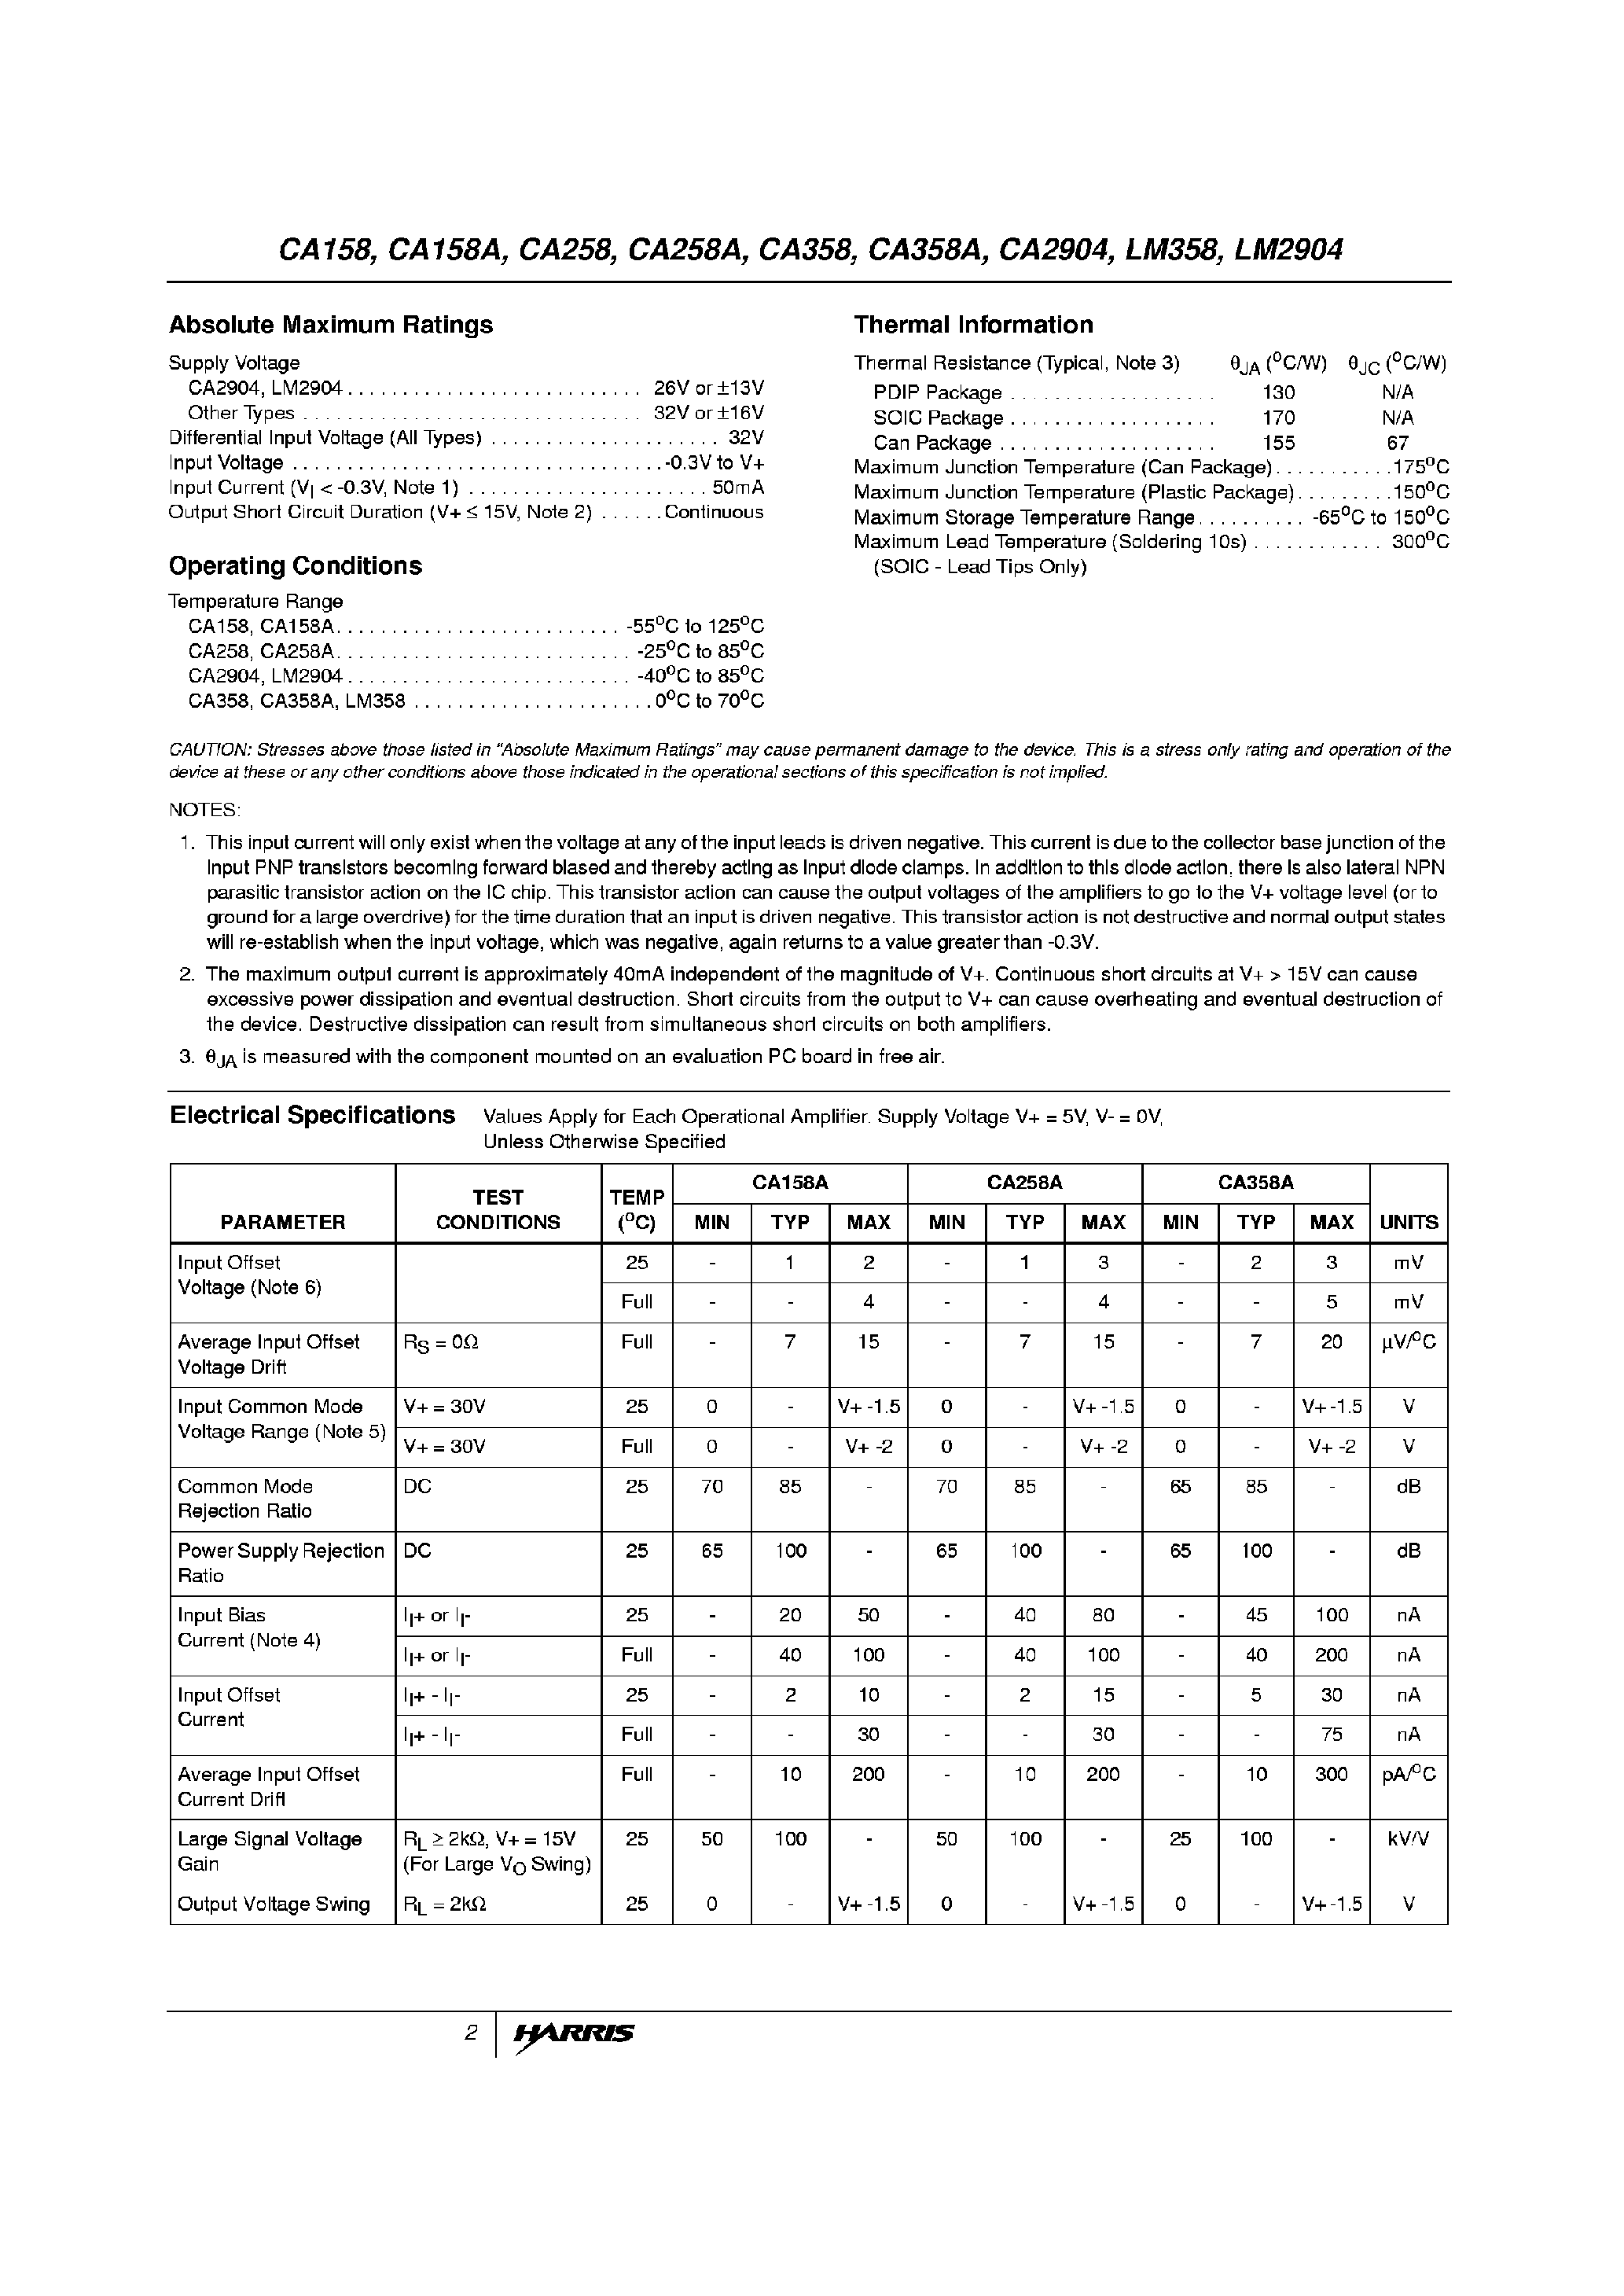 Datasheet CA158 - 1MHz OPERATIONAL AMPLIFIERS page 2